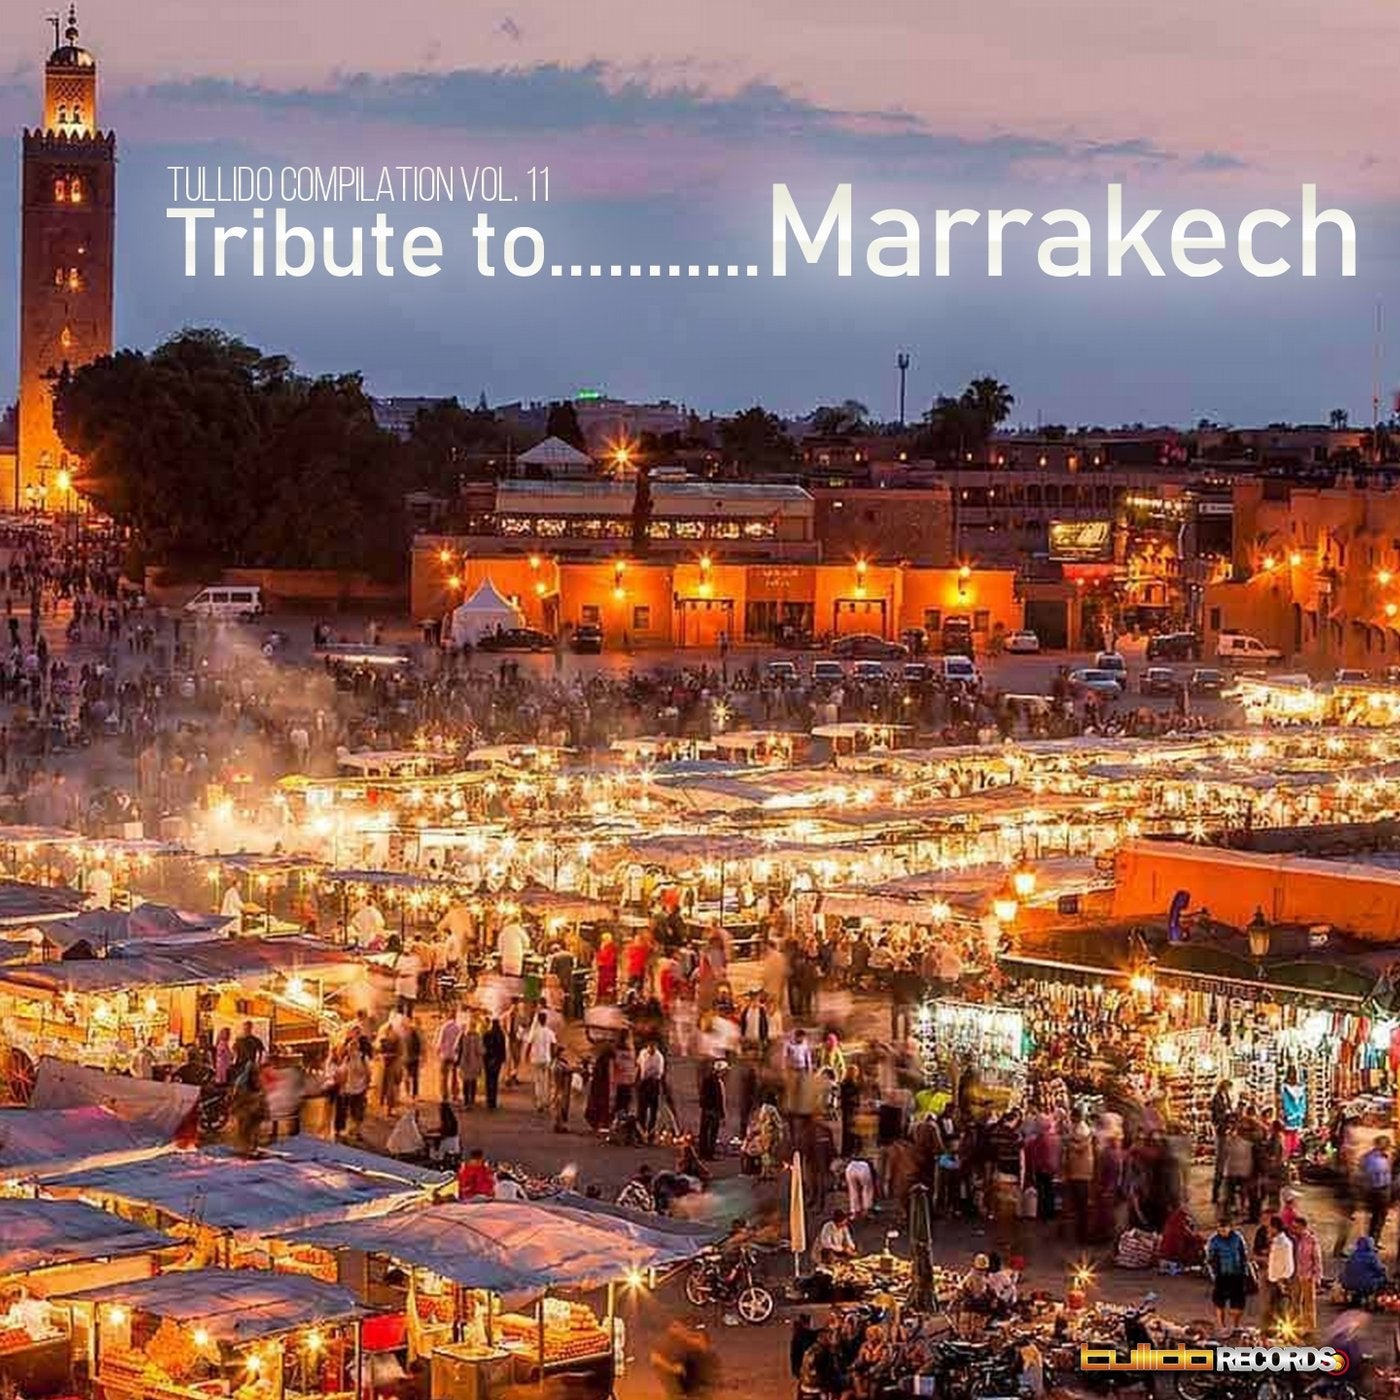 Tullido Records Compilation, Vol. 11 (Tribute to Marrakech)